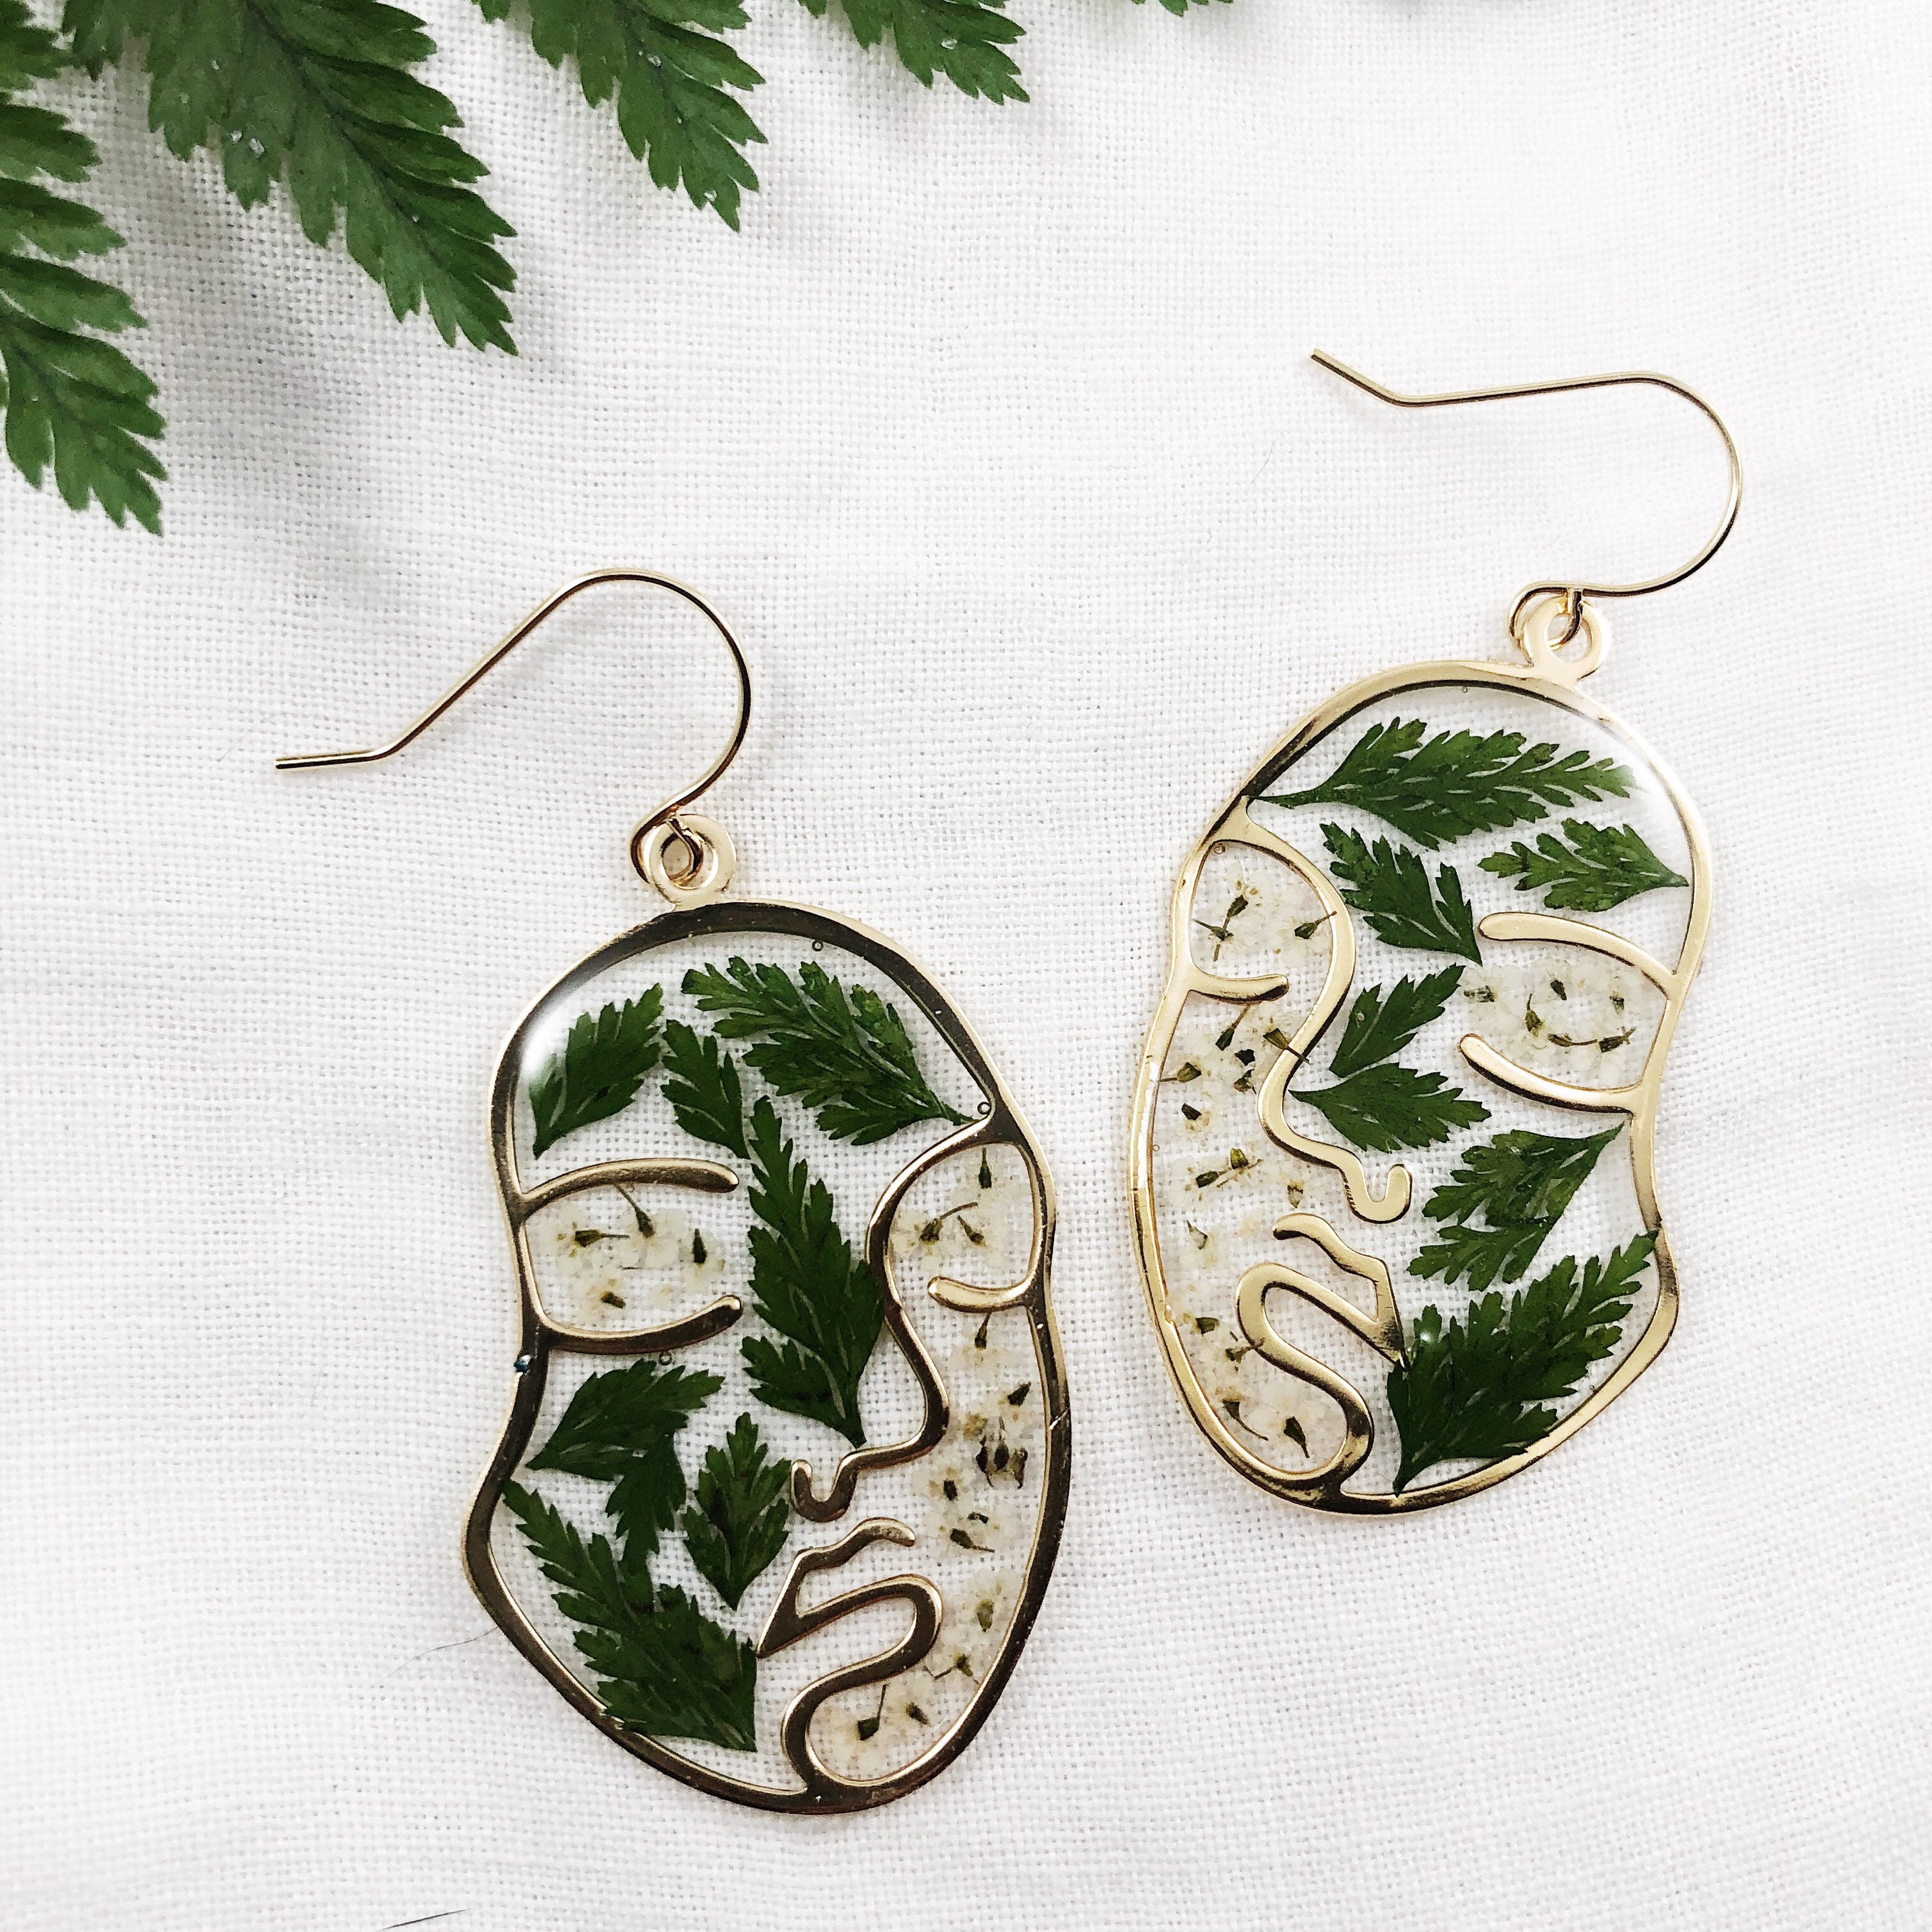 Blythe - Gold Face Earrings with Preserved Ferns and Flowers